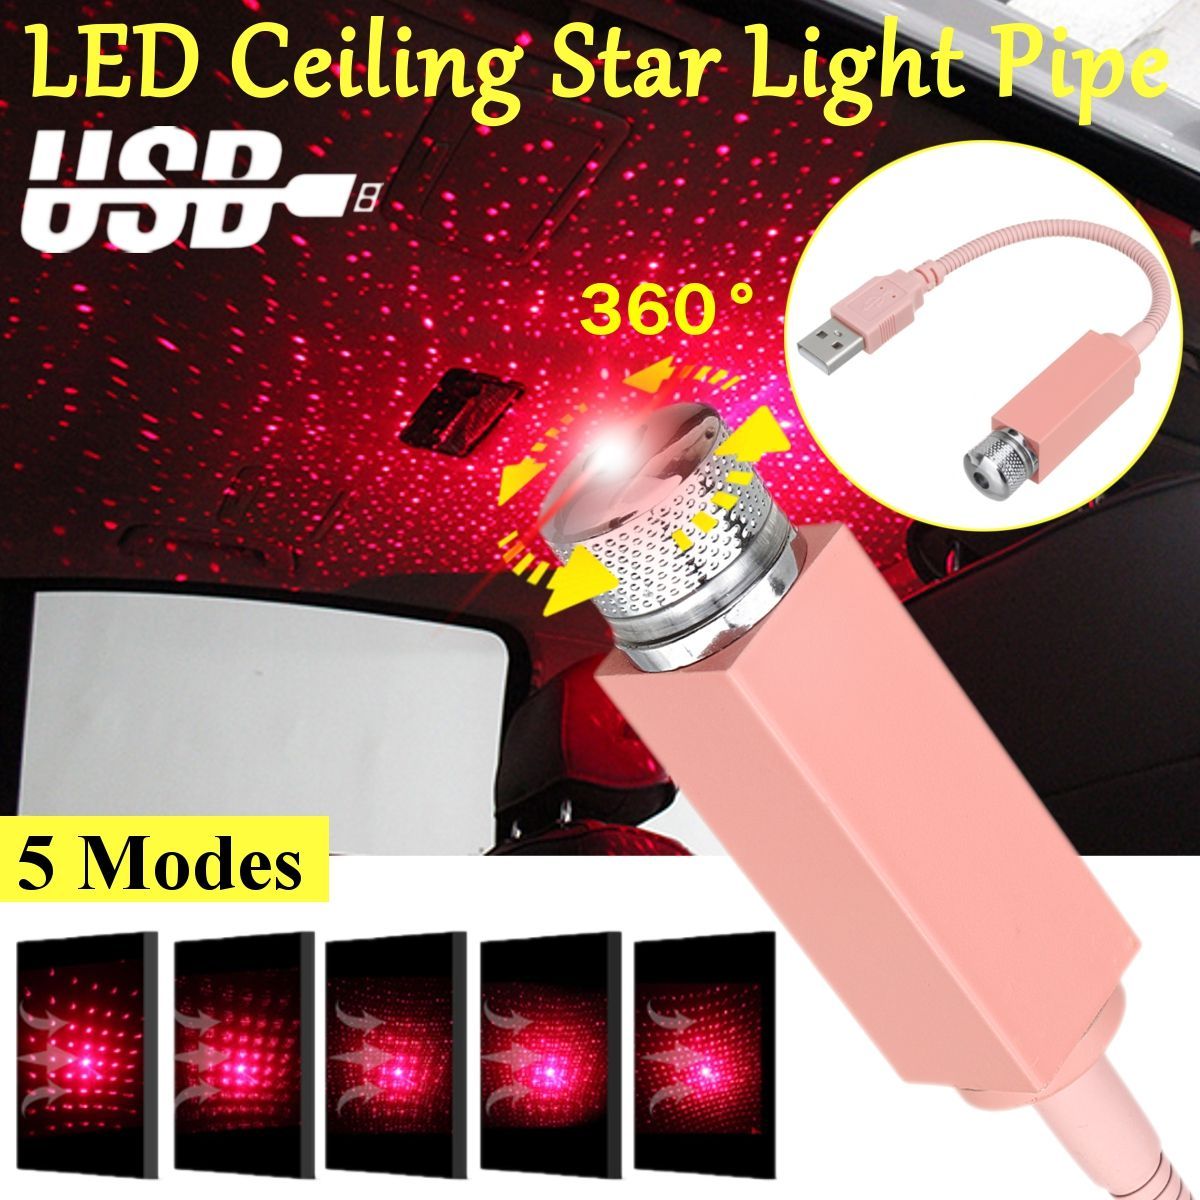 LED-Car-Interior-Atmosphere-Ceiling-Night-Star-Lights-Flexible-Pipe-Roof-Decoration-Lamp-USB-Port-Re-1629455